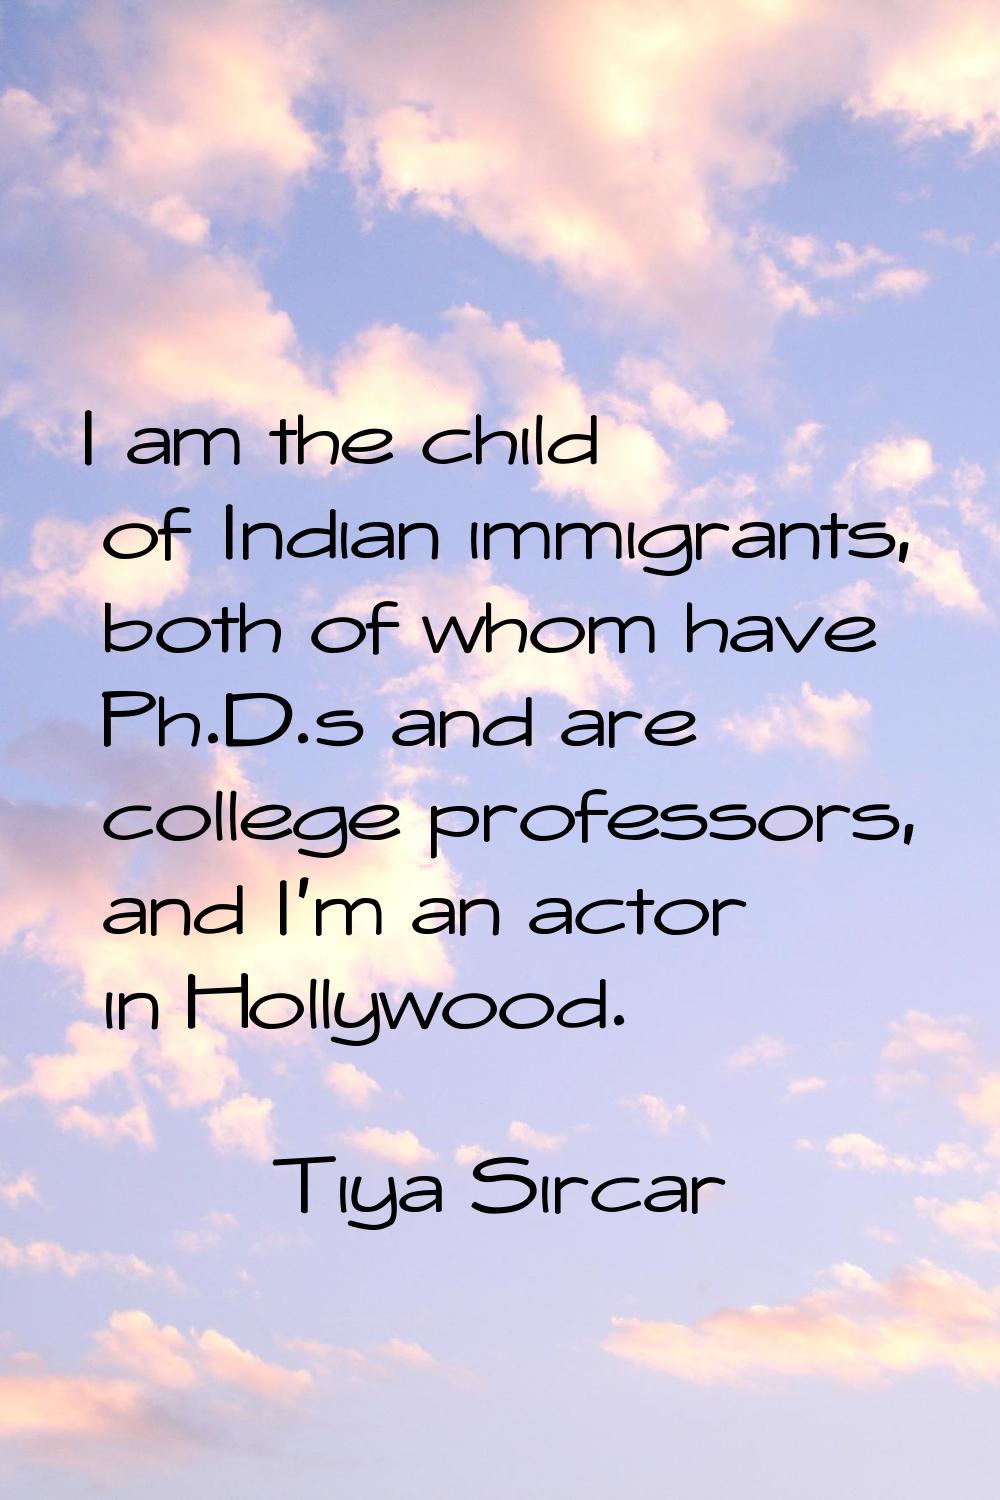 I am the child of Indian immigrants, both of whom have Ph.D.s and are college professors, and I'm a